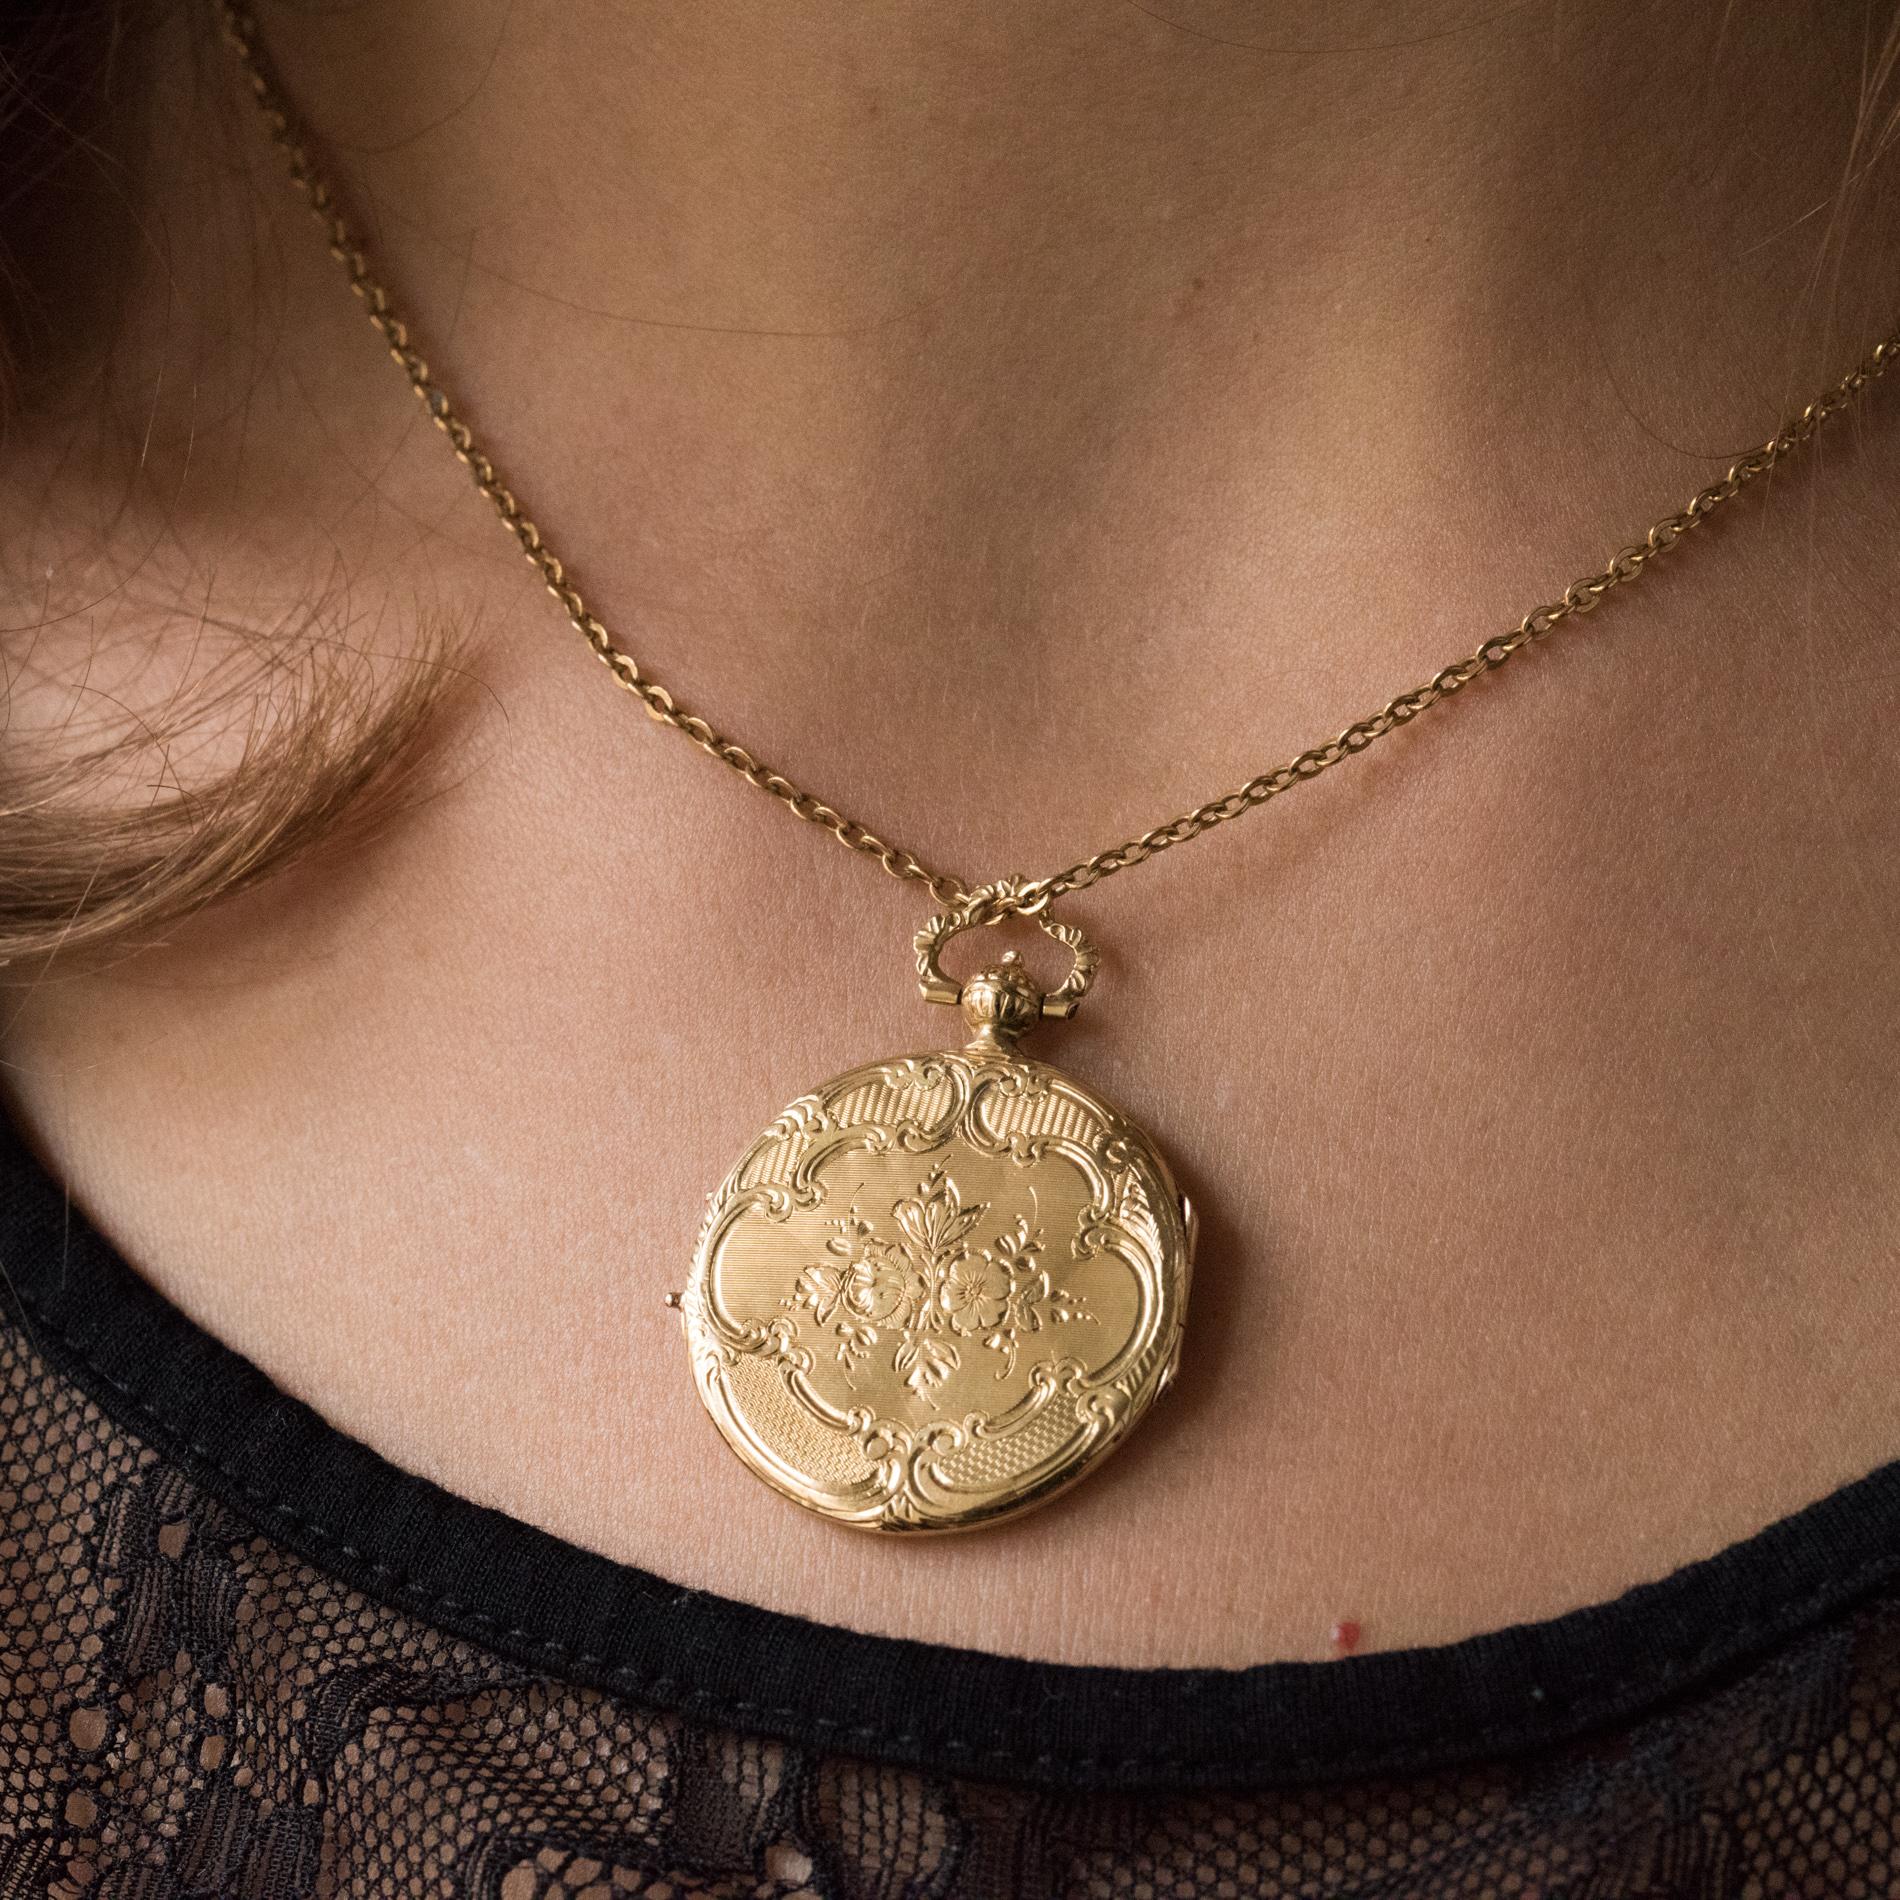 Locket pendant in 18 karat yellow gold, eagle's head hallmark.
Round shape, this antique pendant is engraved on both sides with floral motifs on amati background. The bail is also chiseled. It is opening with a hinge for placing a photo.
Height: 3.8